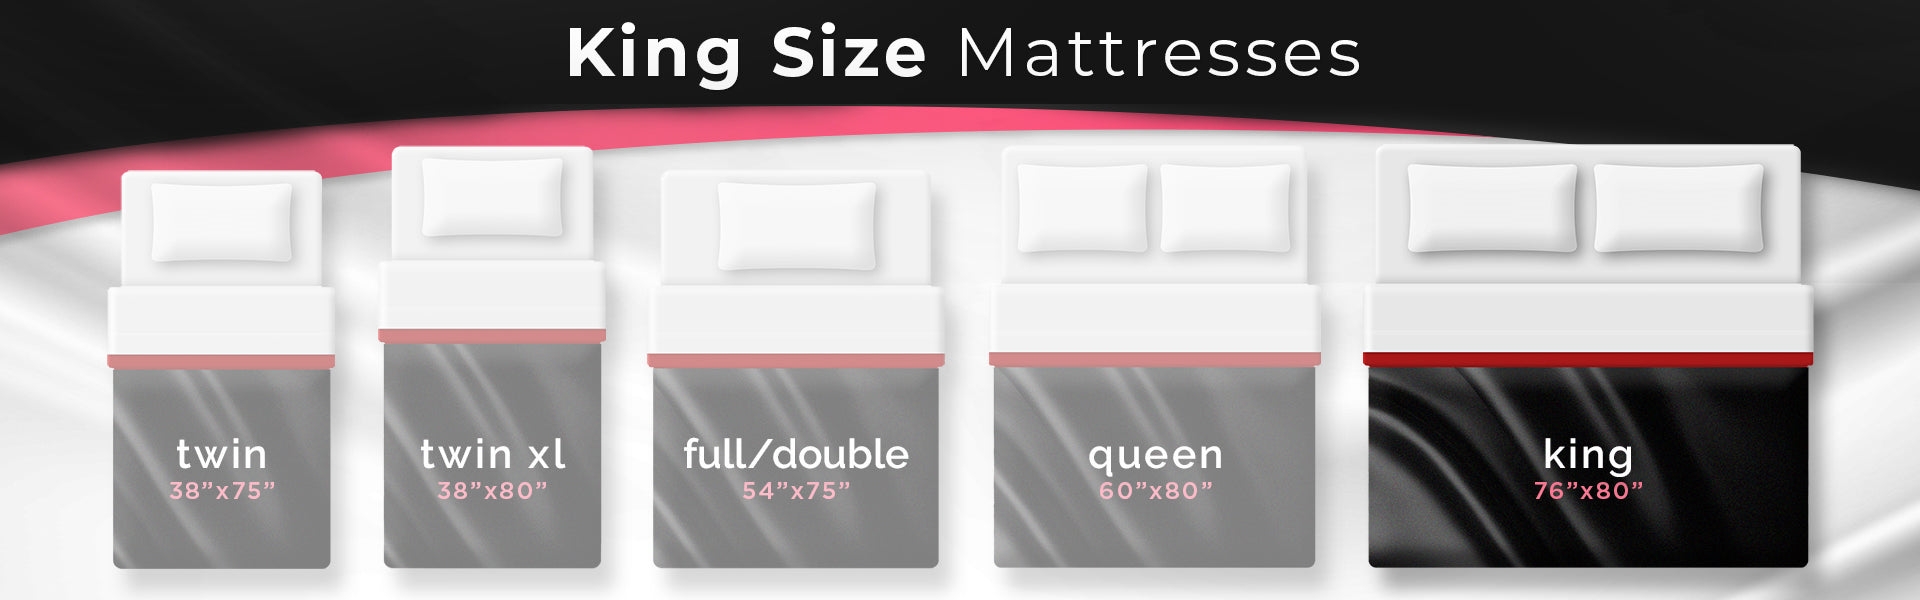 5 illustrated mattresses , king size mattress dimensions highlighted 